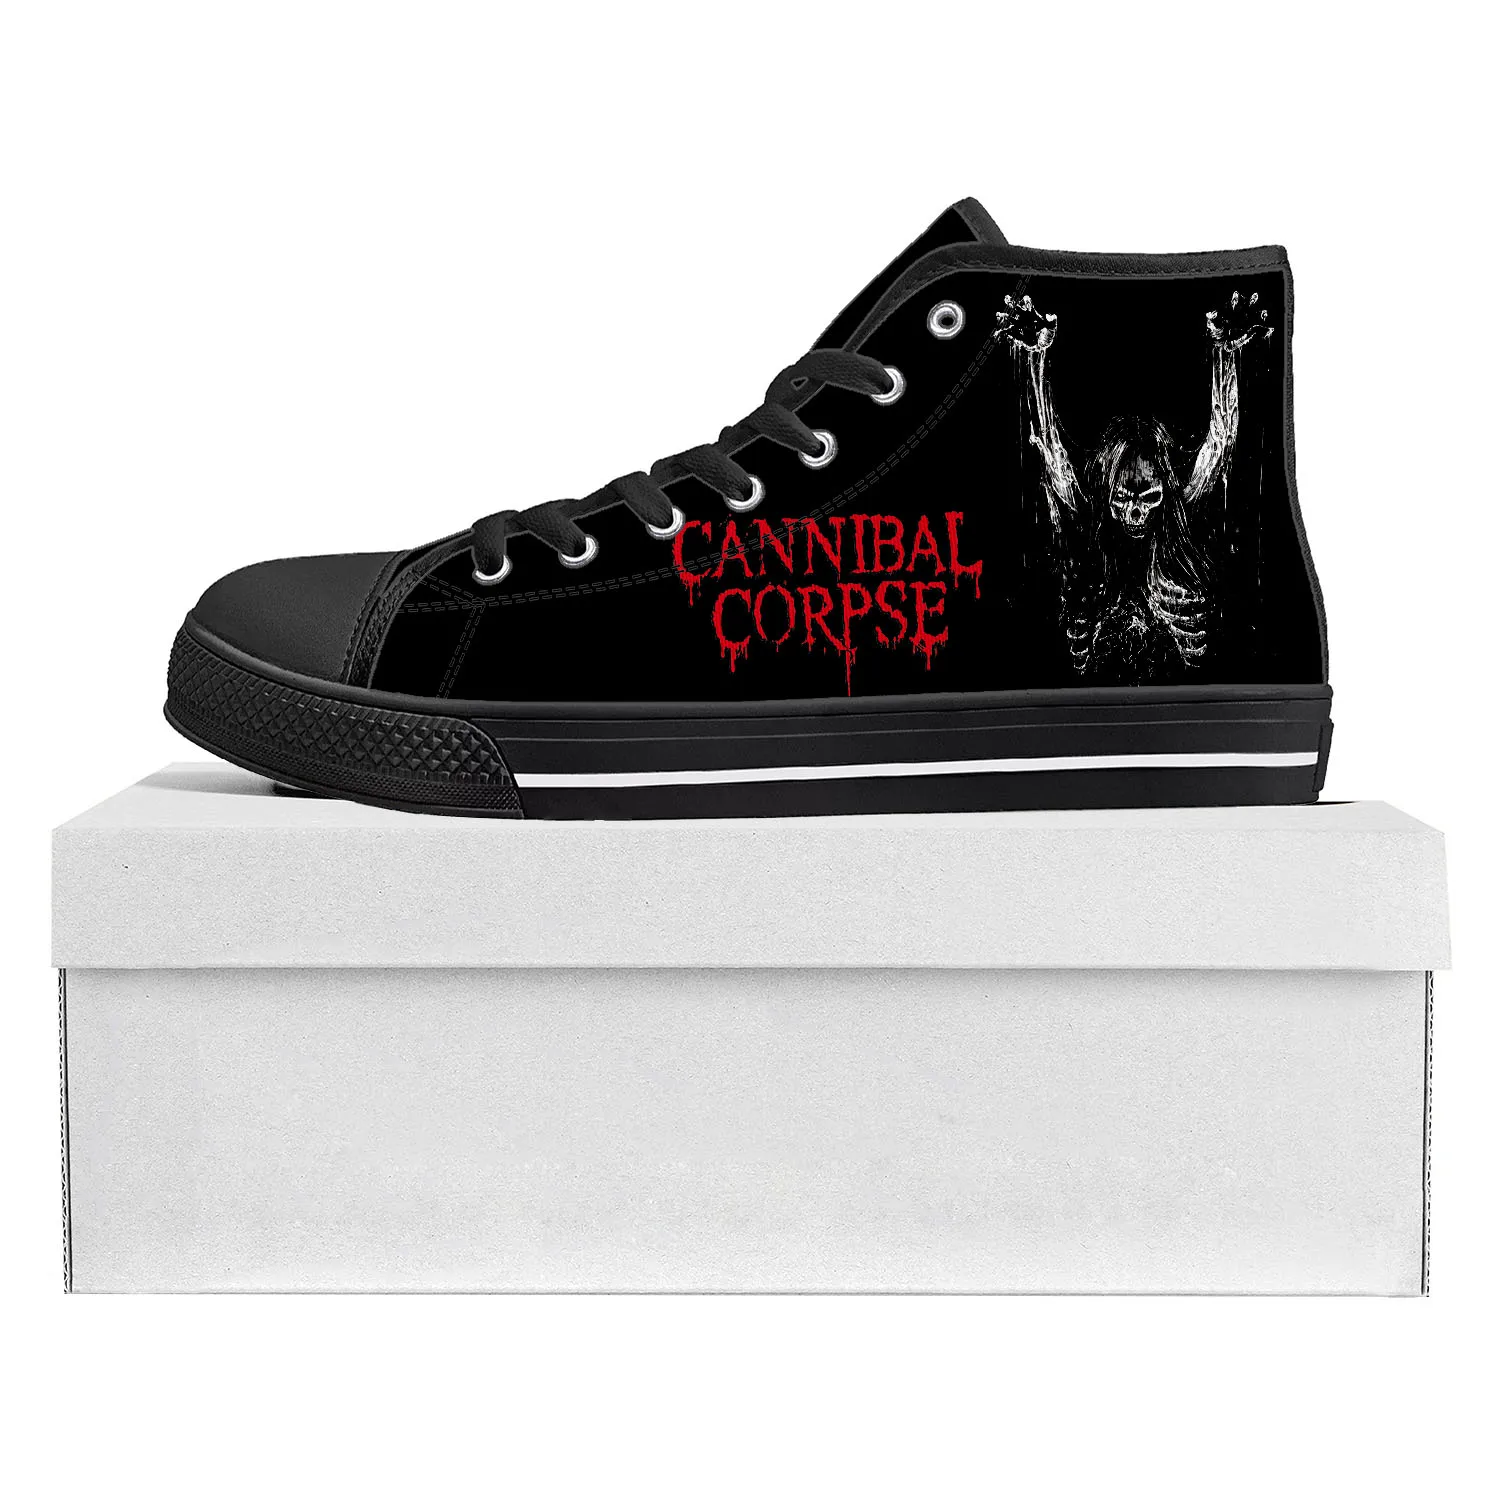 

Cannibal Corpse High Top High Quality Sneakers Mens Womens Teenager Canvas Death Metal Sneaker Casual Custom Made Shoes Black